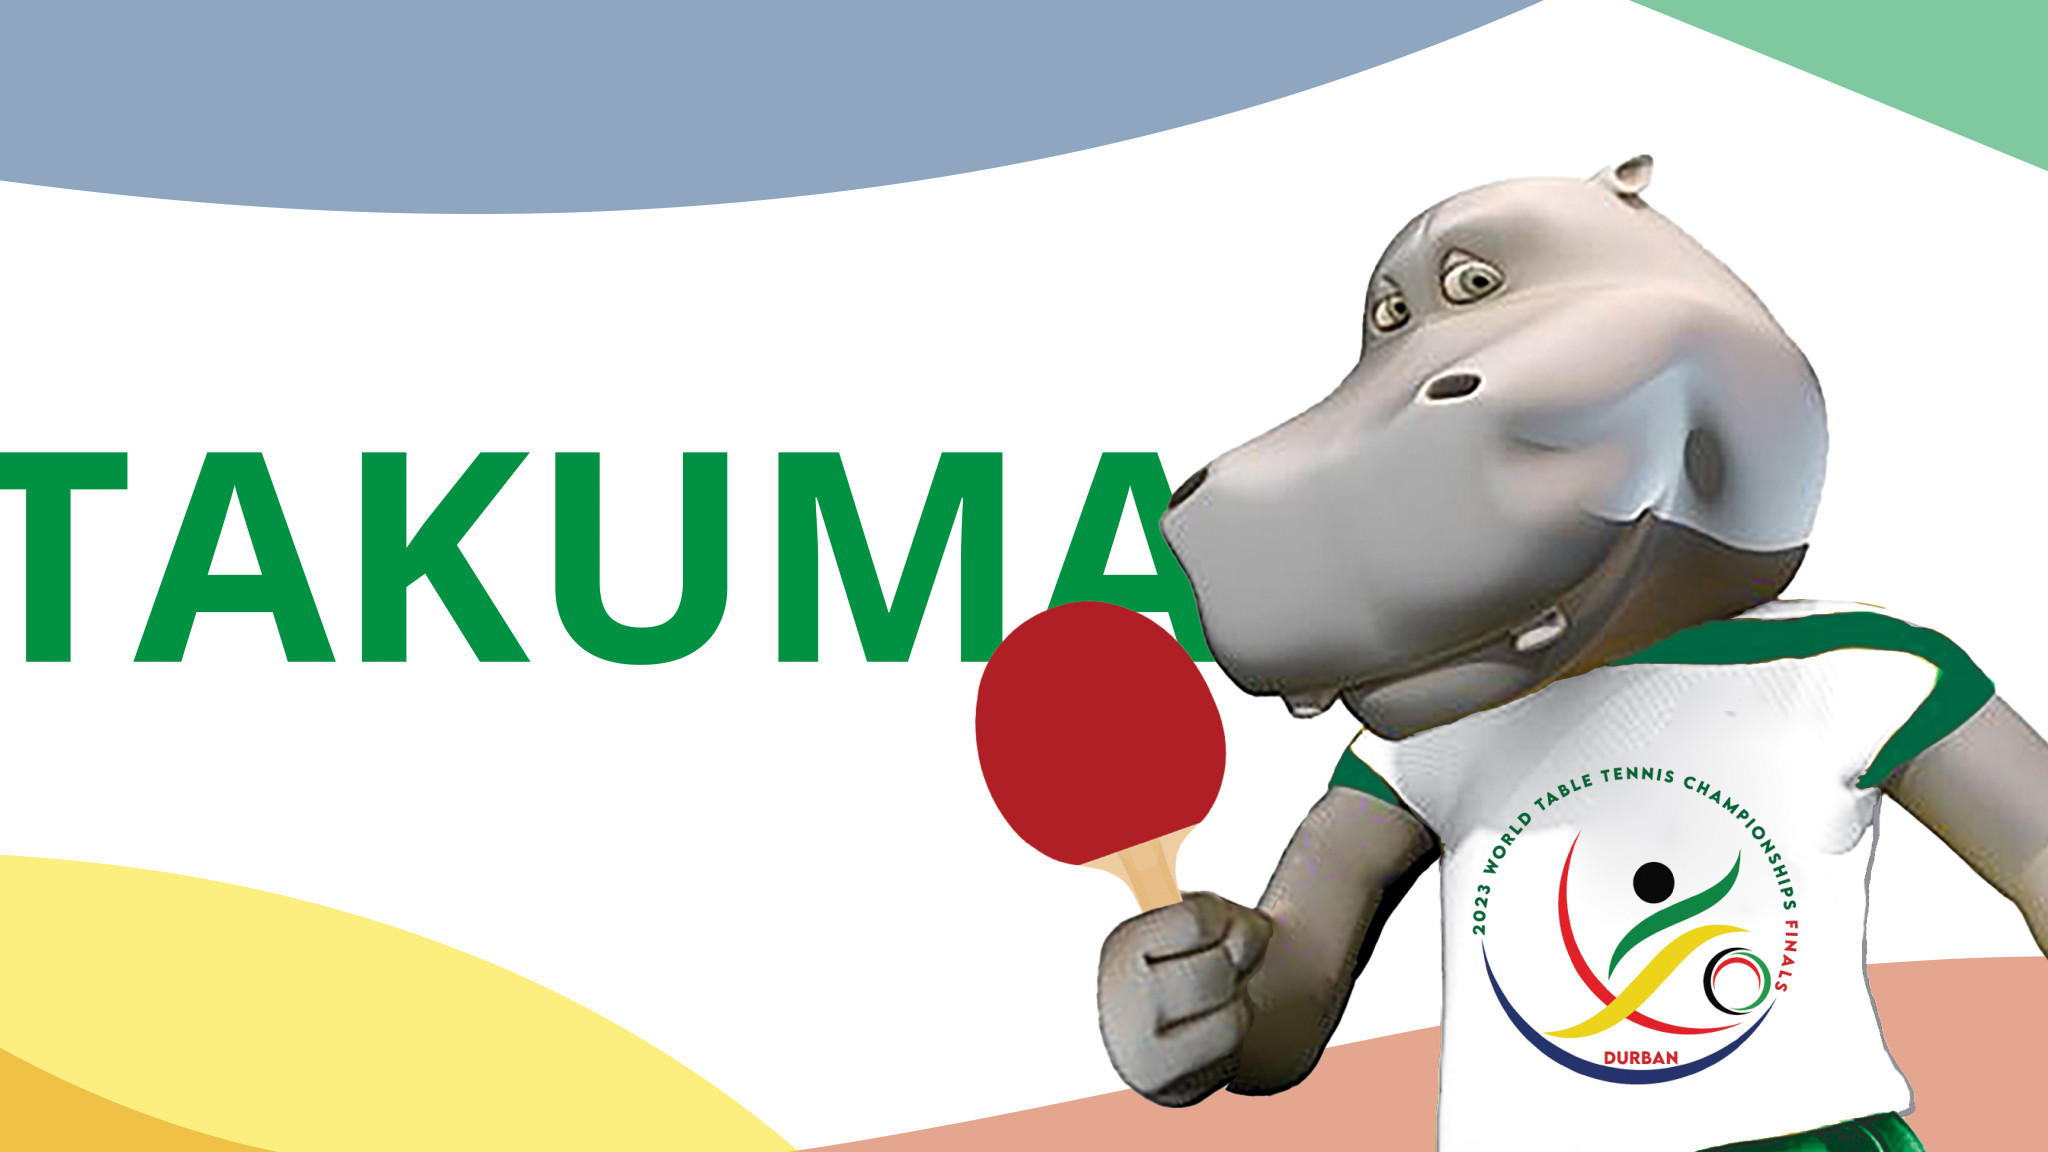 South Africa recycles hippo mascot for World Table Tennis Championships